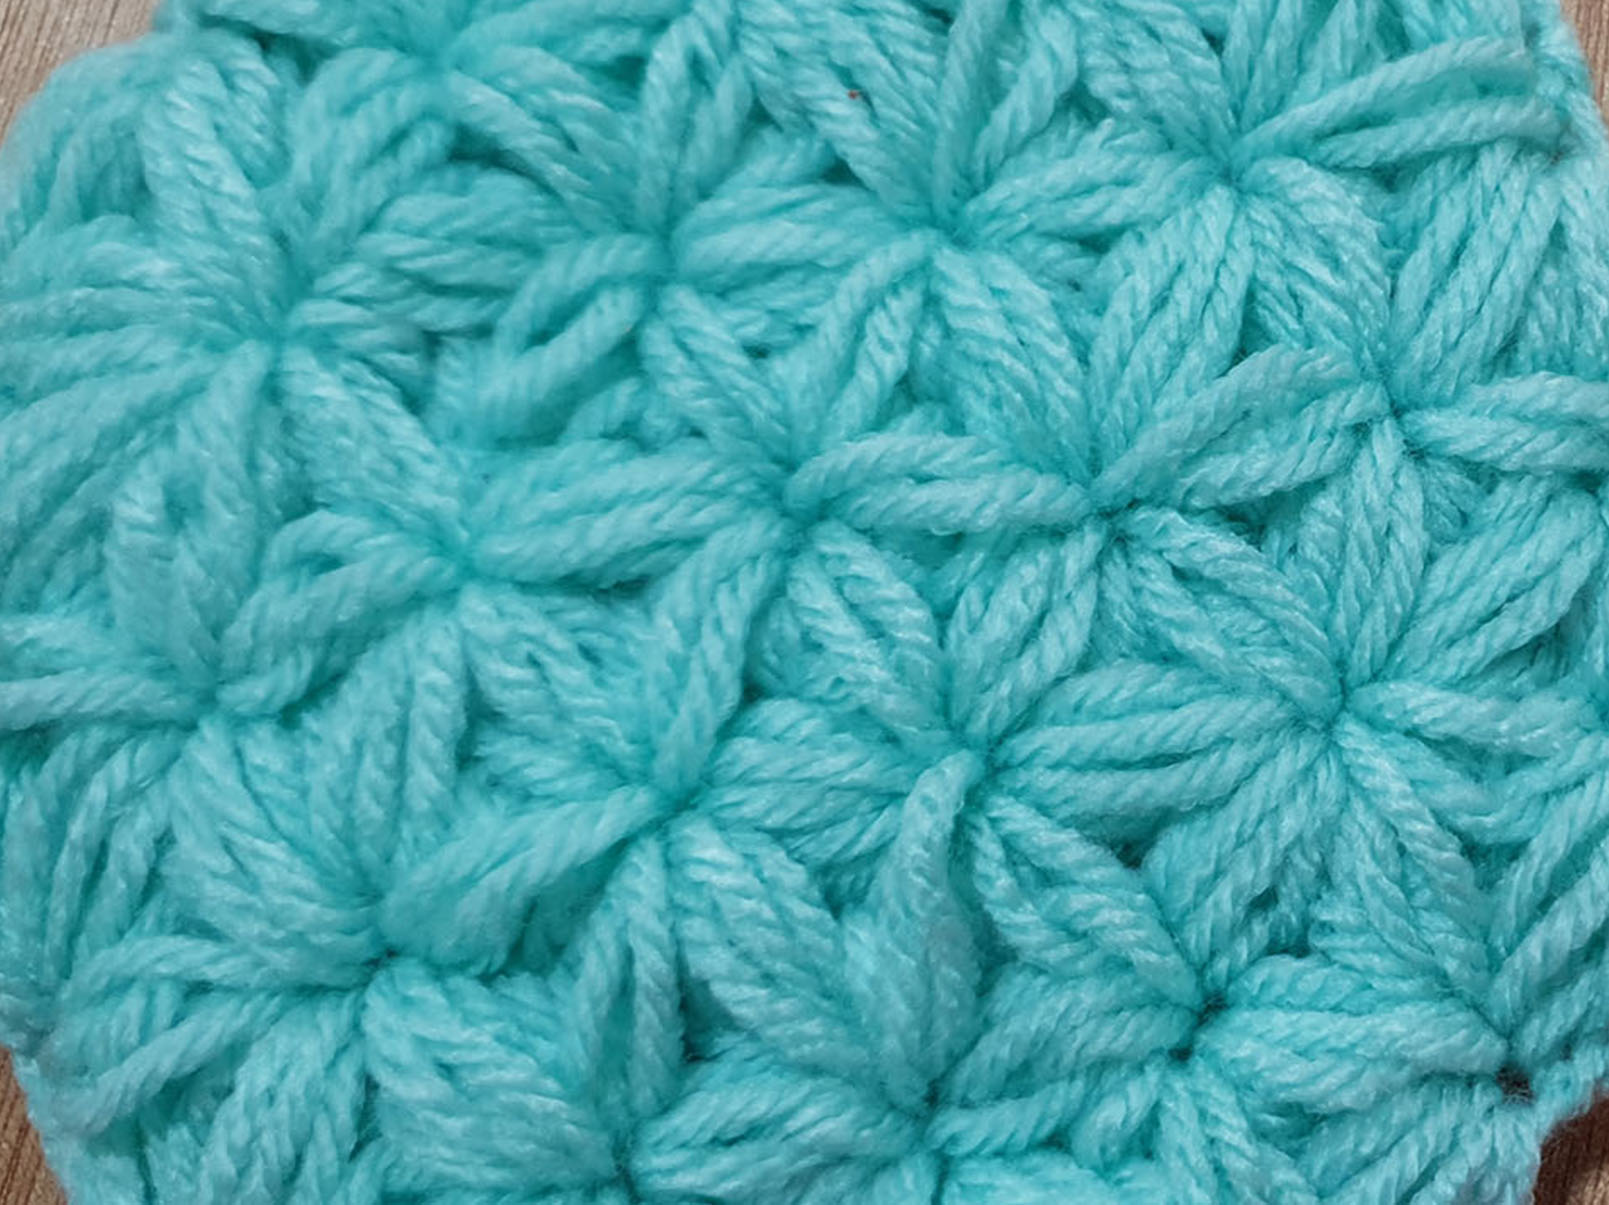 How to Crochet the Jasmine Stitch: A Step-by-Step Guide